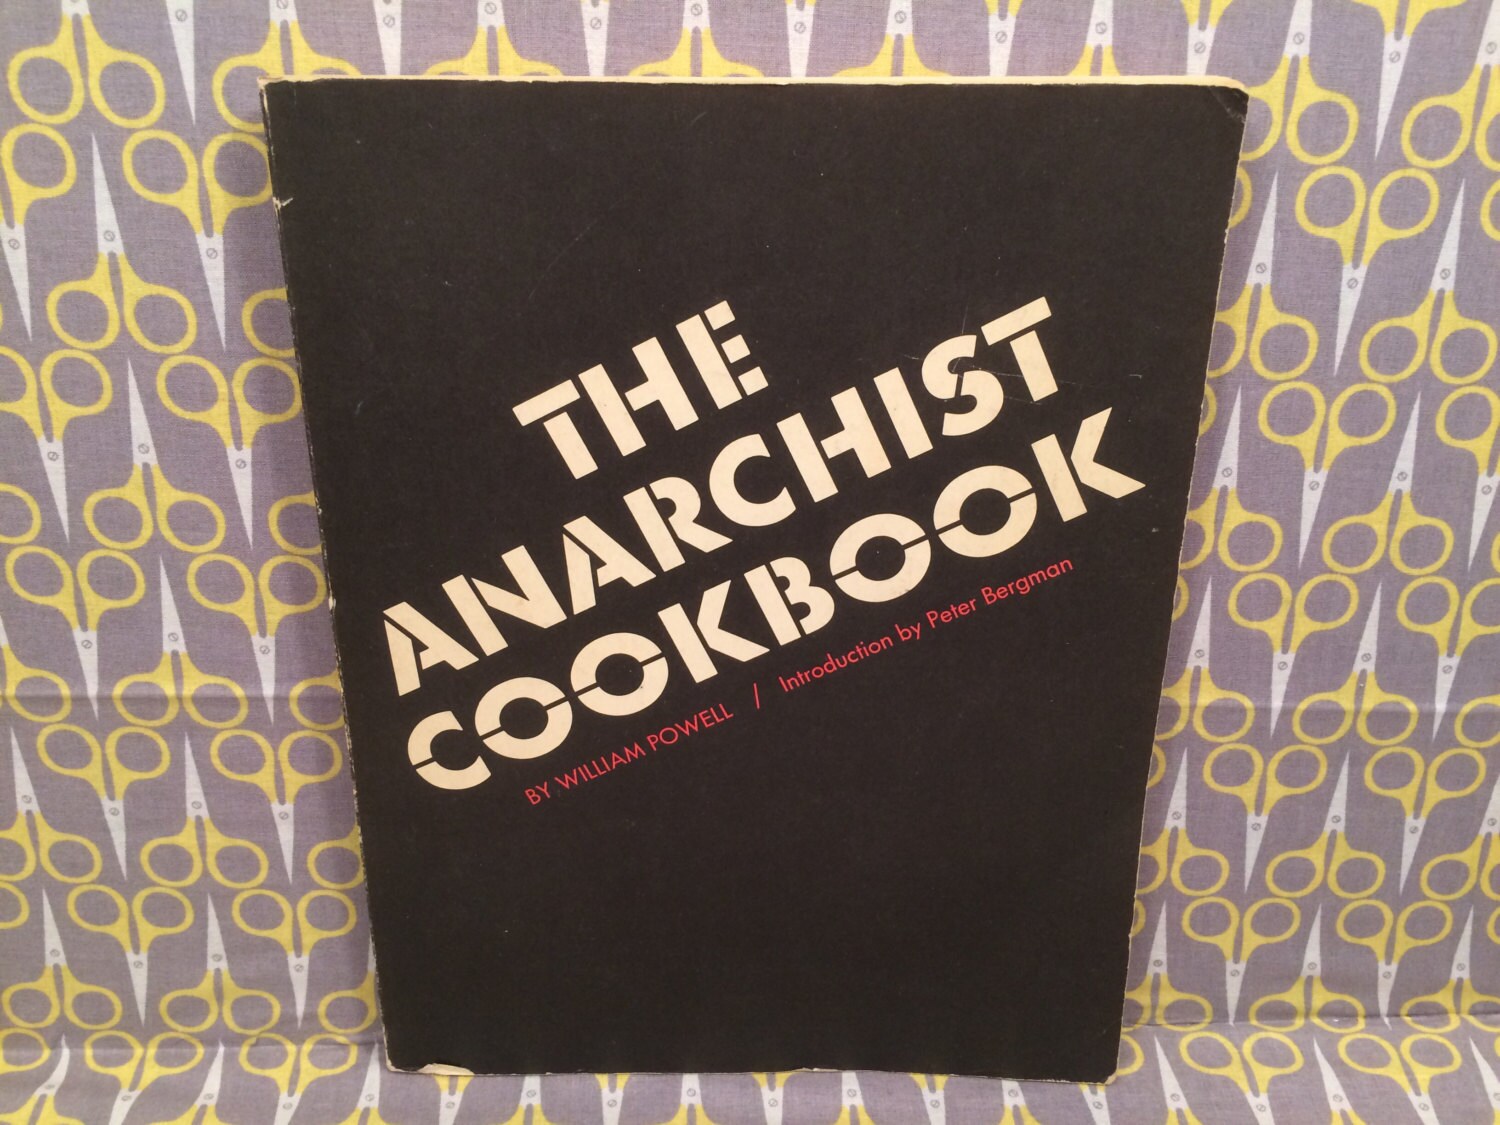 The Anarchist Cookbook by William Powell by VinylJunction on Etsy